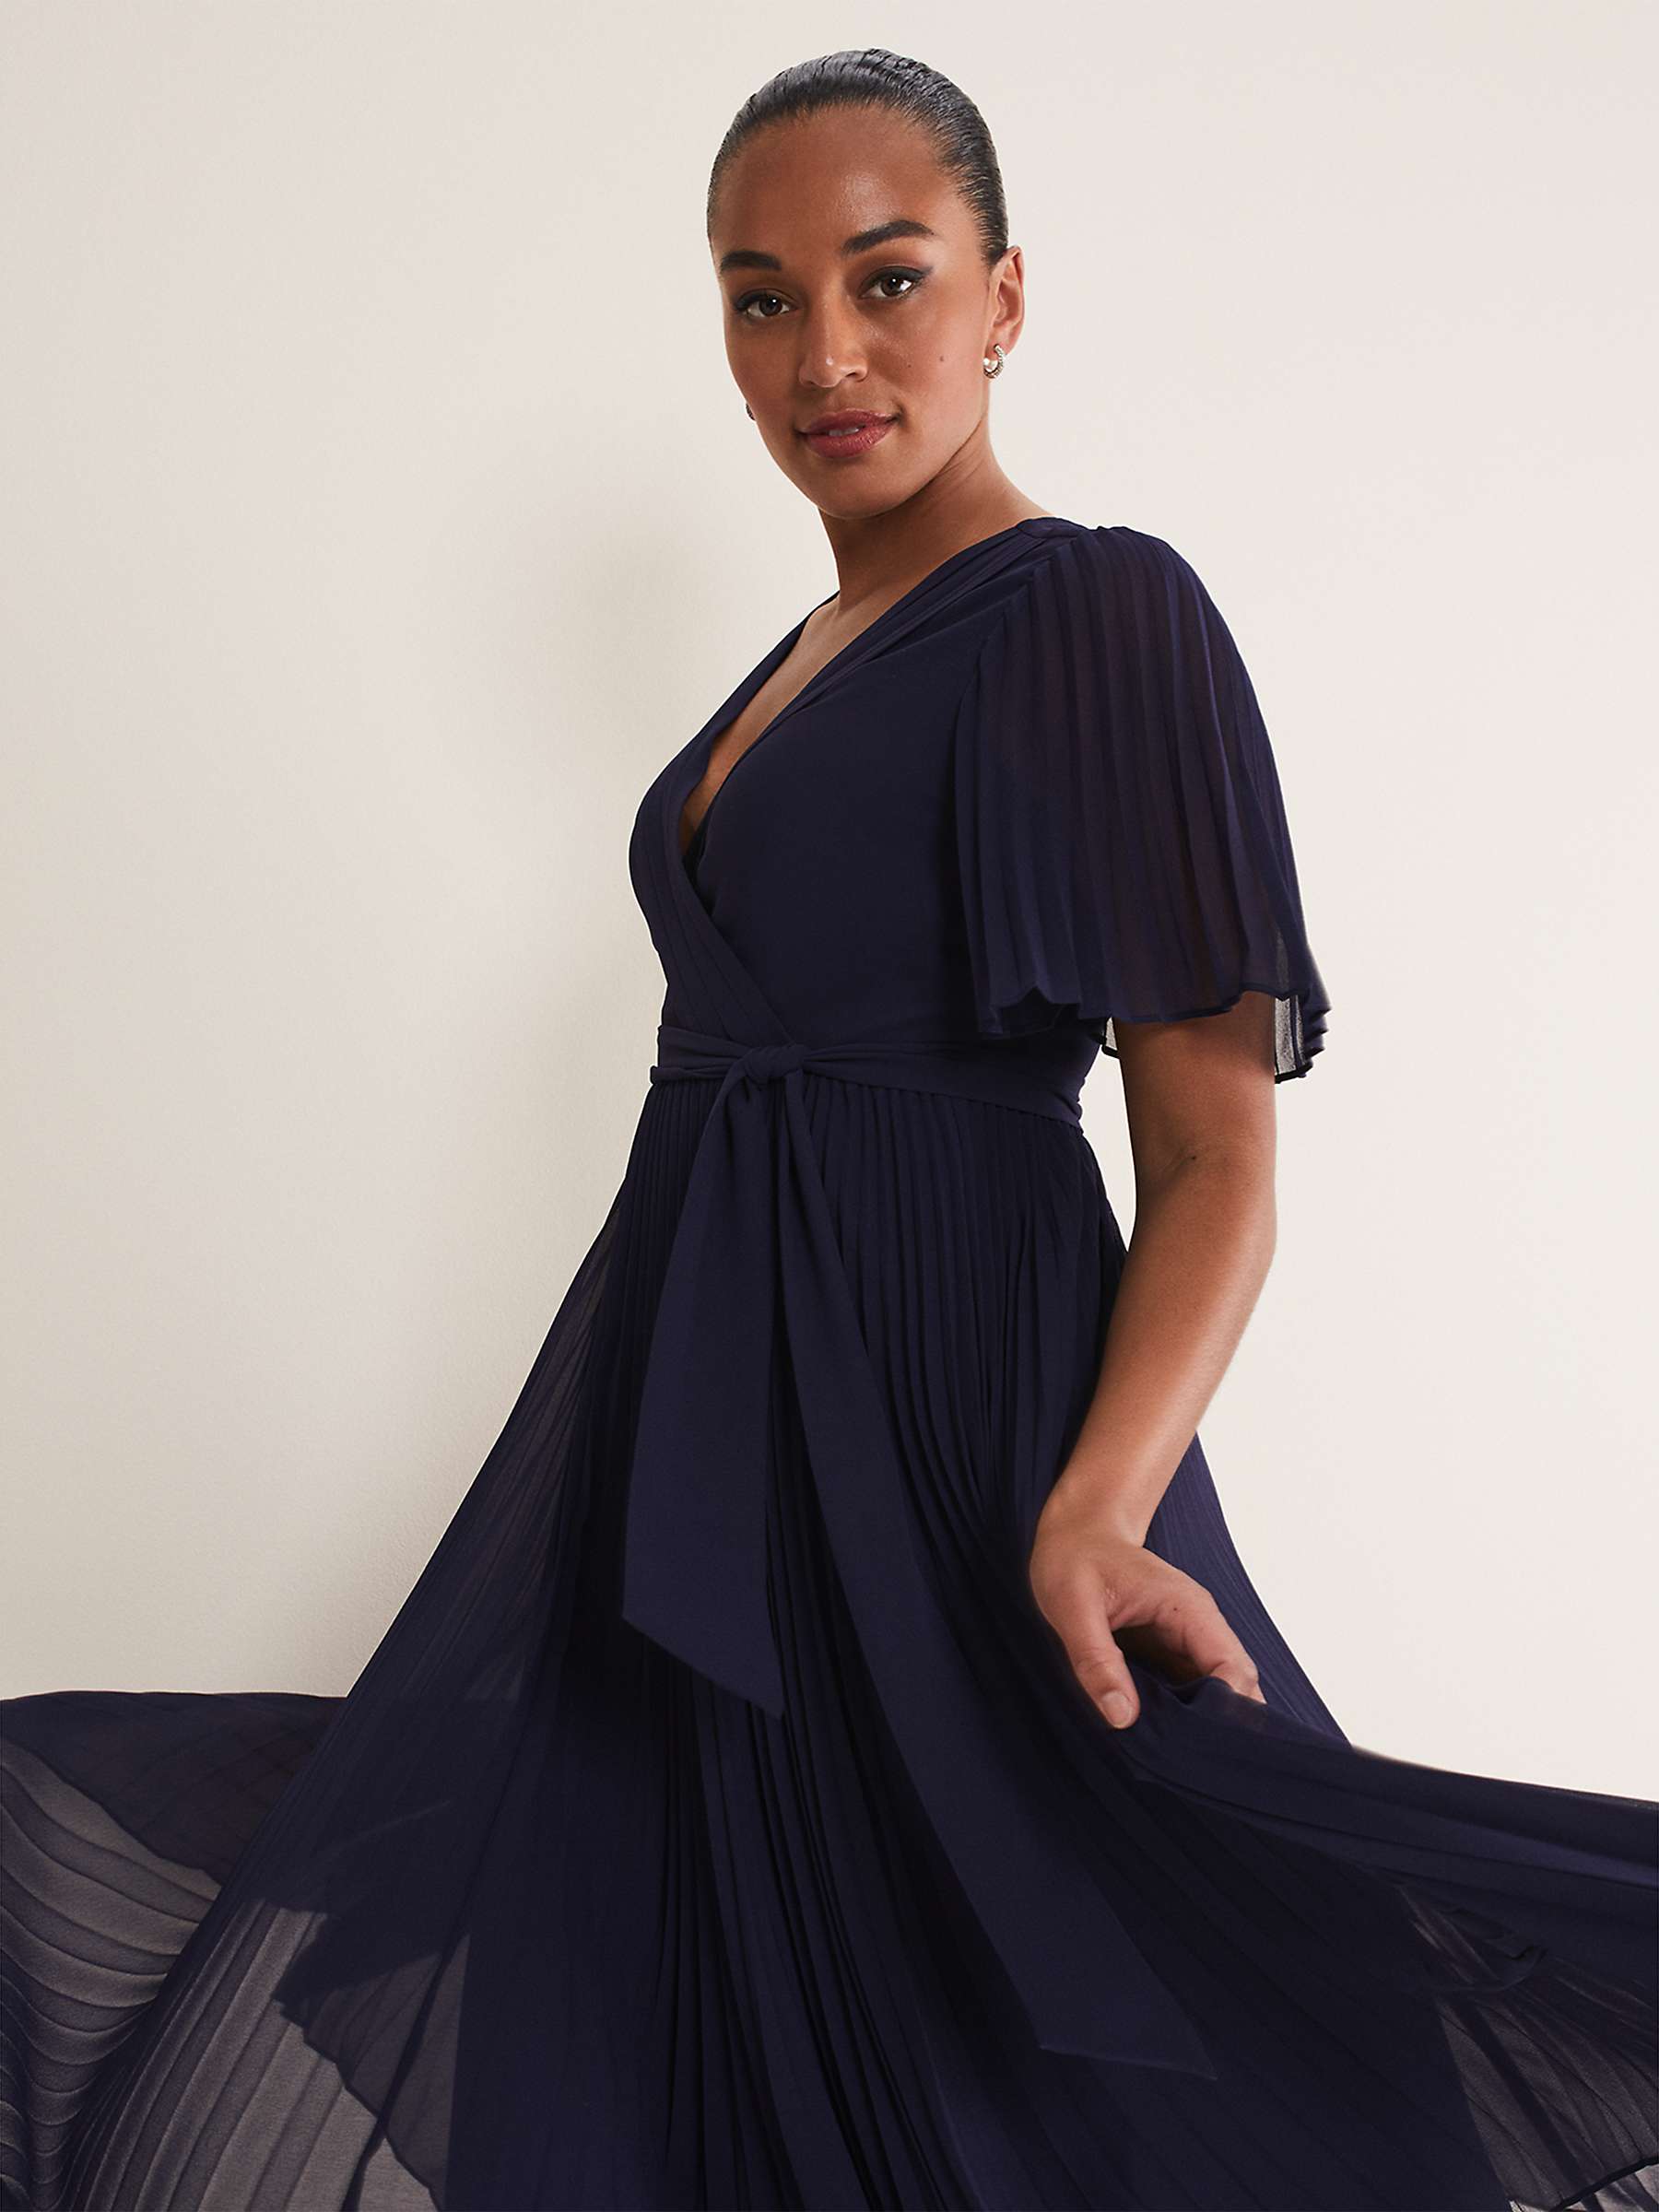 Buy Phase Eight Kendall Pleated Midi Dress Online at johnlewis.com